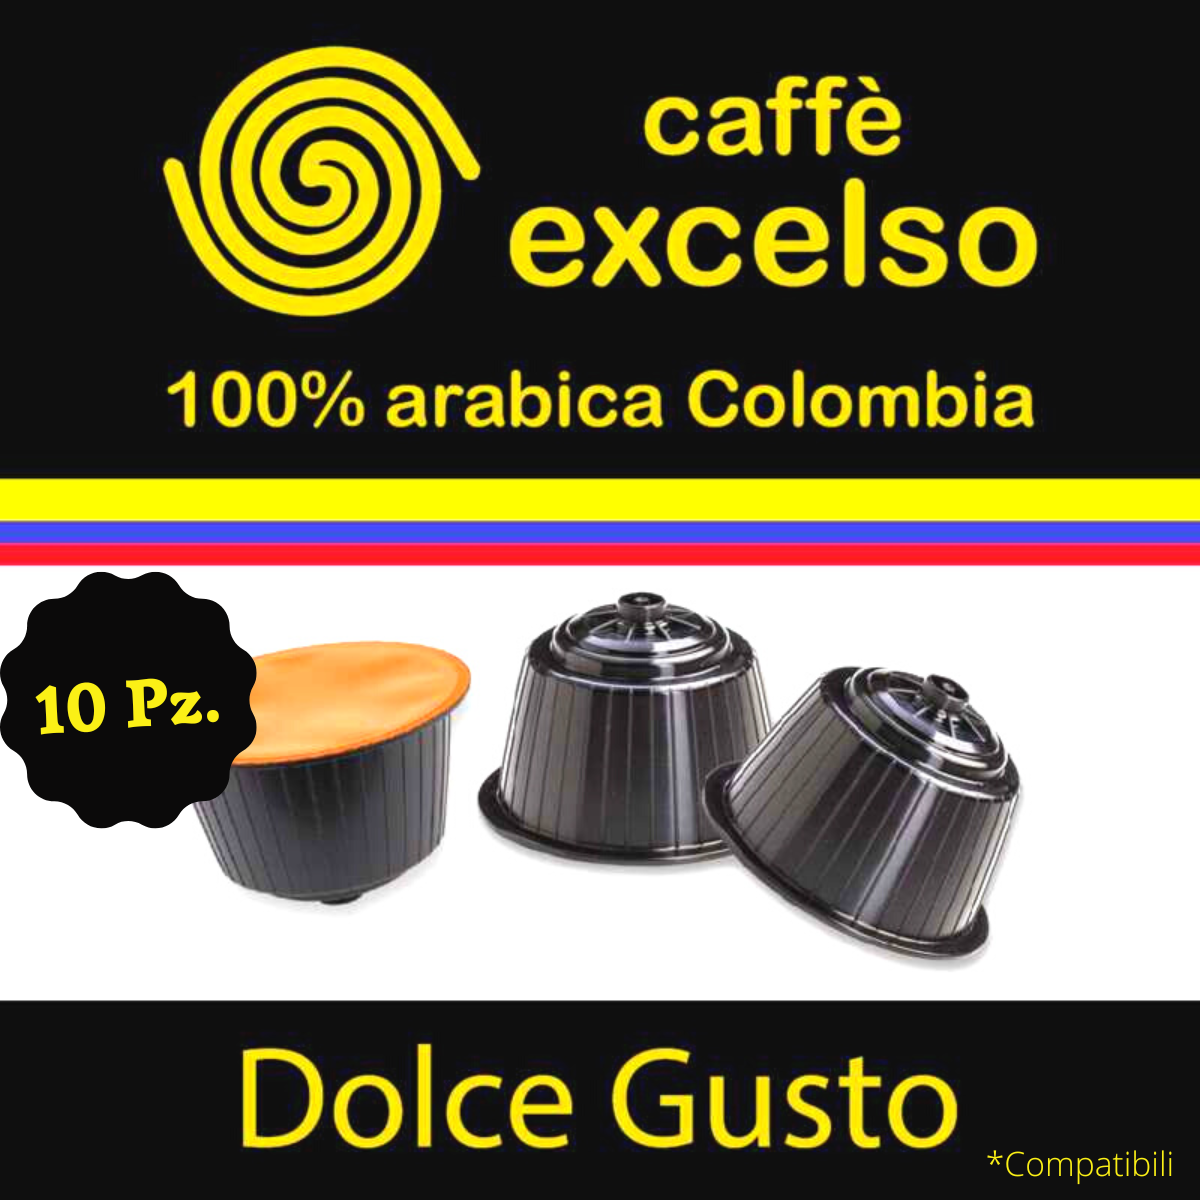 Capsule compatibili Dolce Gusto, Caffè Excelso Colombia 100